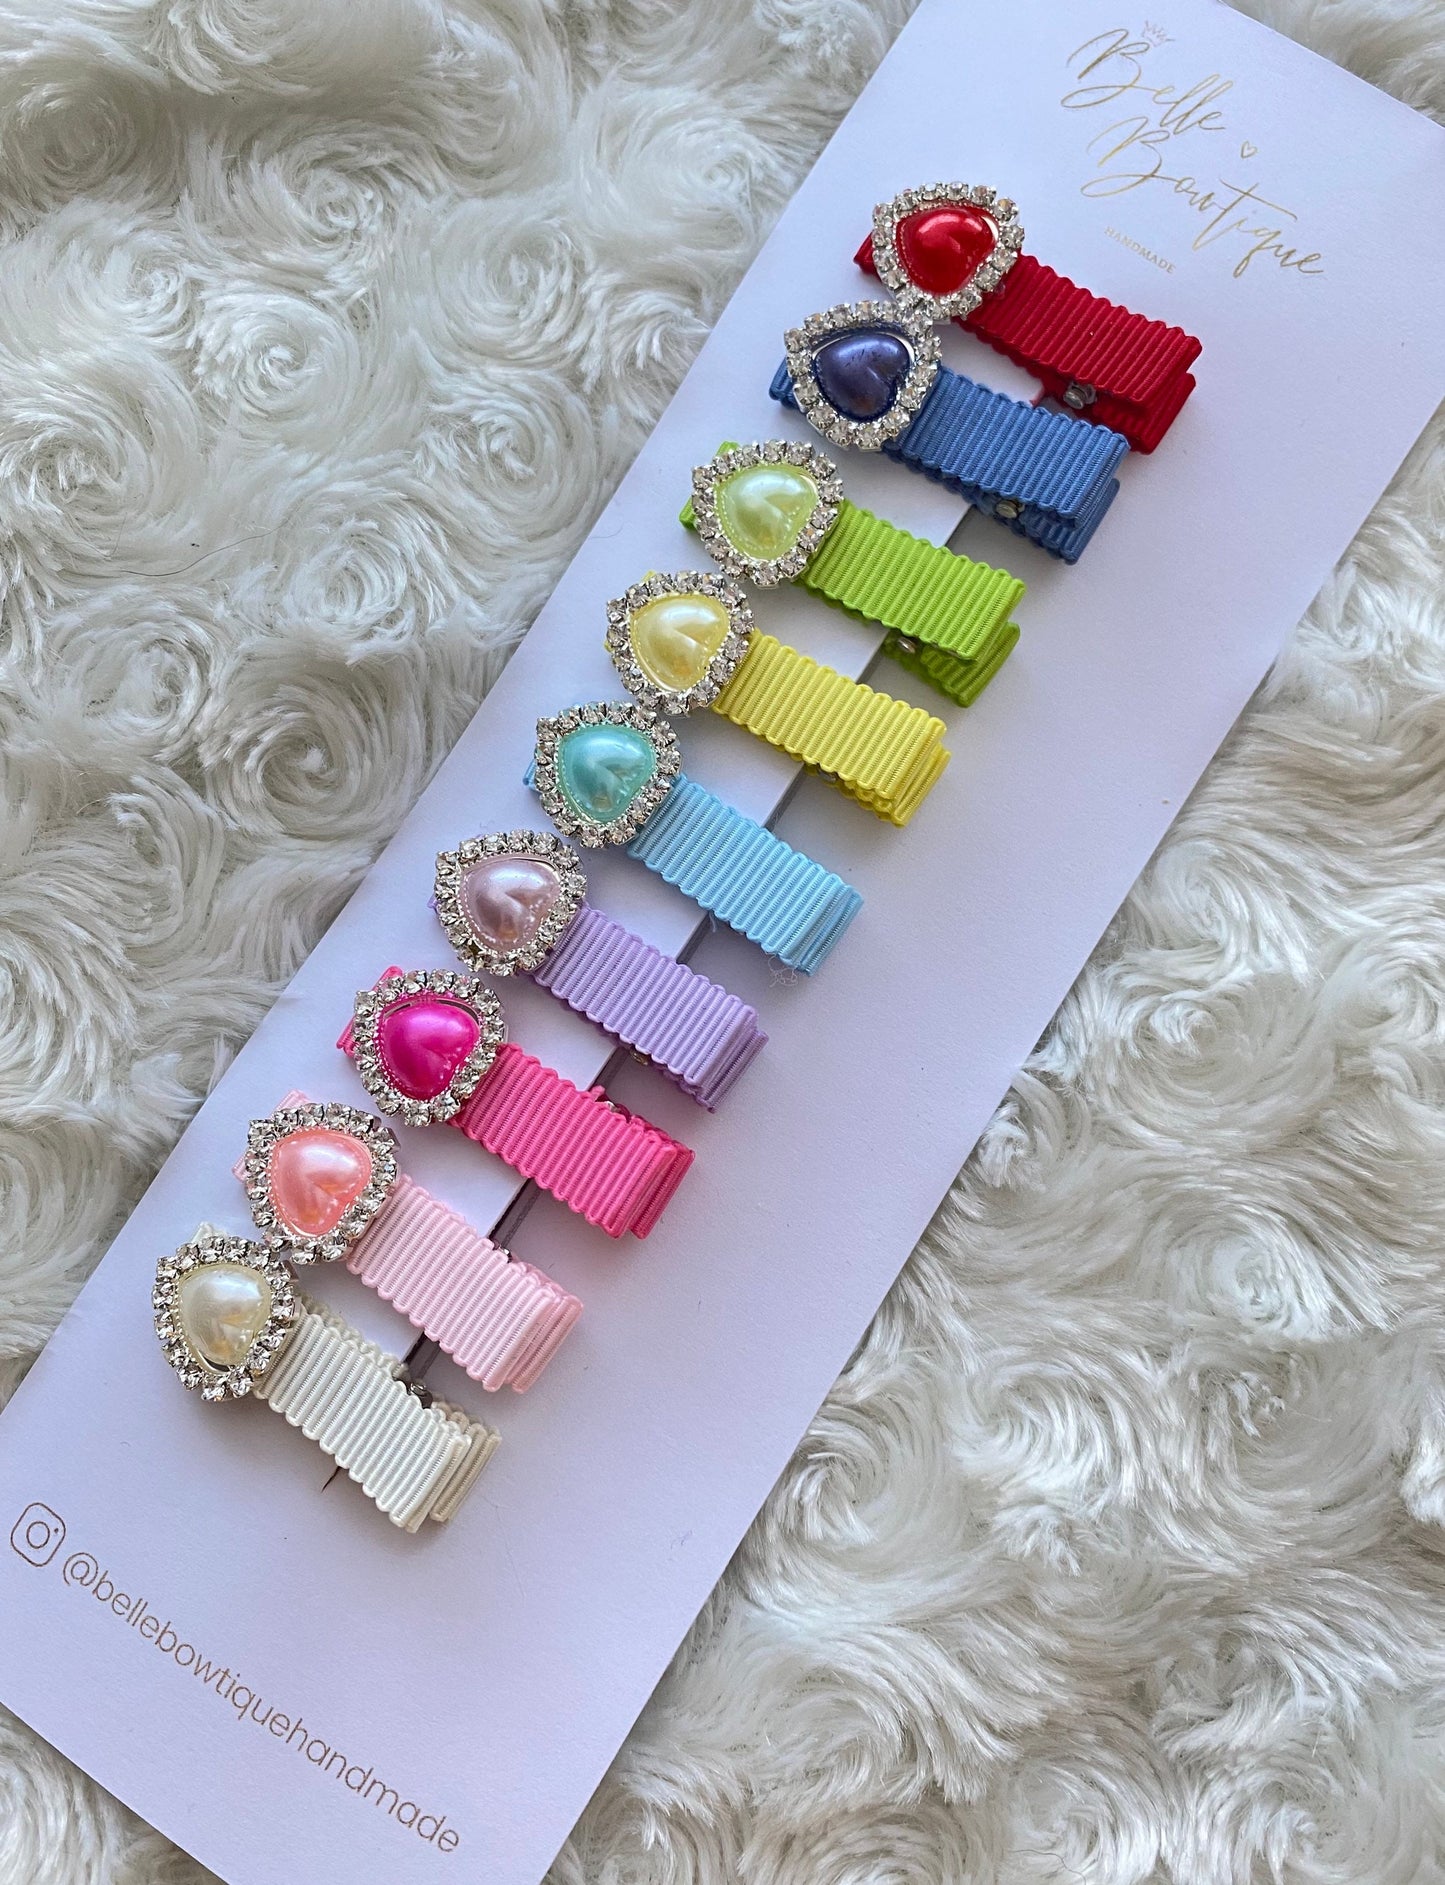 Rainbow Heart Ribbon Fringe Clips Pack of 9 Small Clips - Mini Clips - Clip Pack - Baby Hair Clips - Toddler Hair Clips - Lined hair clip